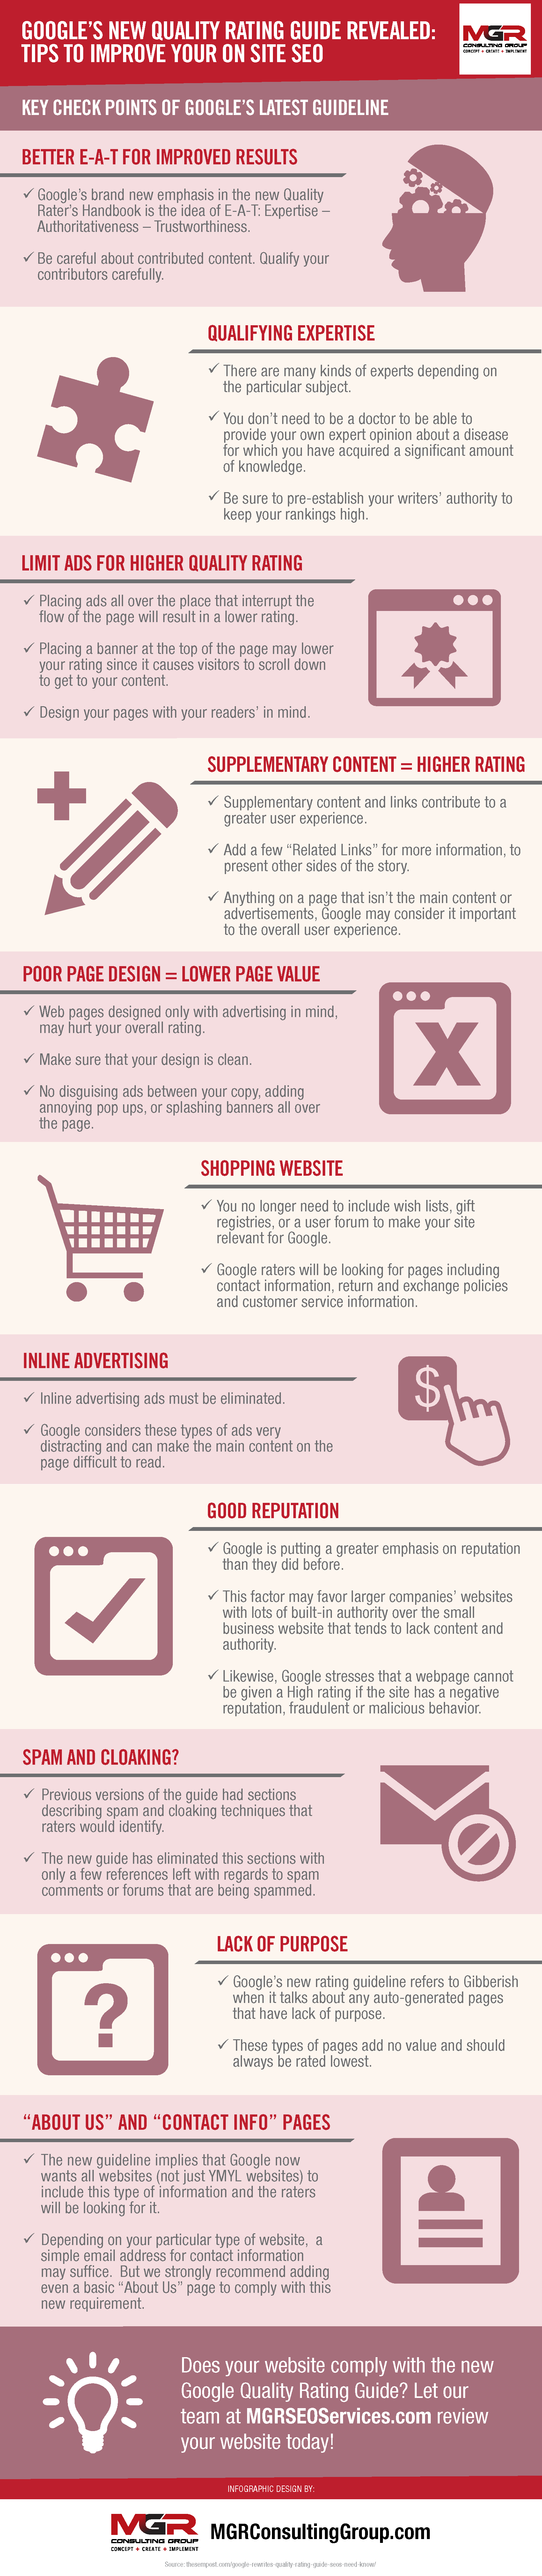 2014 Google Rating Guidelines Infographic